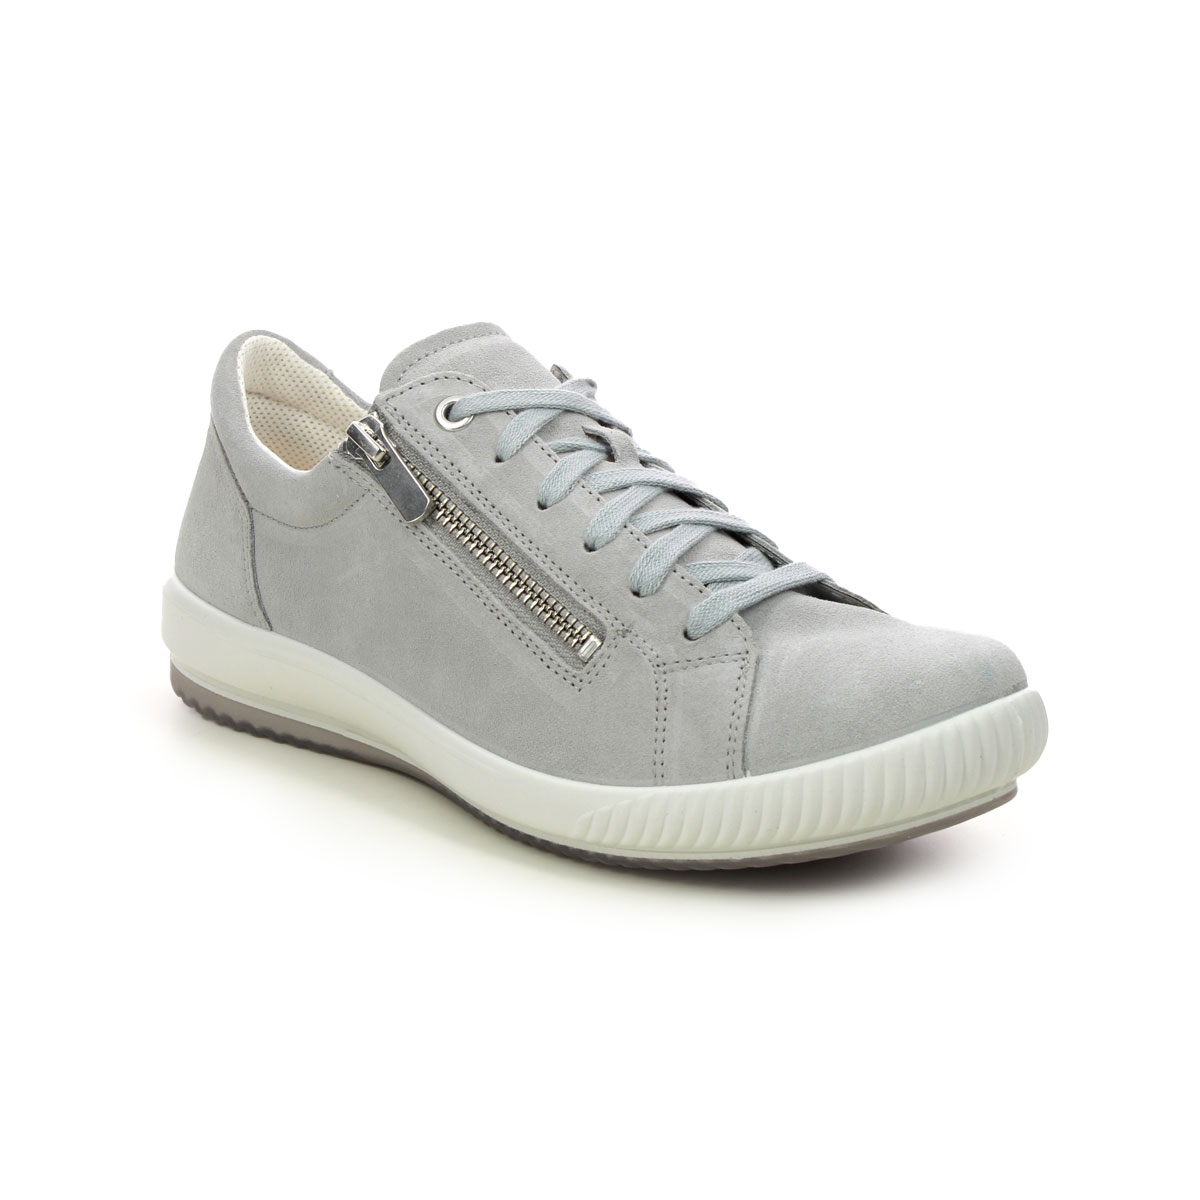 Legero Tanaro 5 Zip Light Grey Womens lacing shoes 2001162-2500 in a Plain Leather in Size 3.5